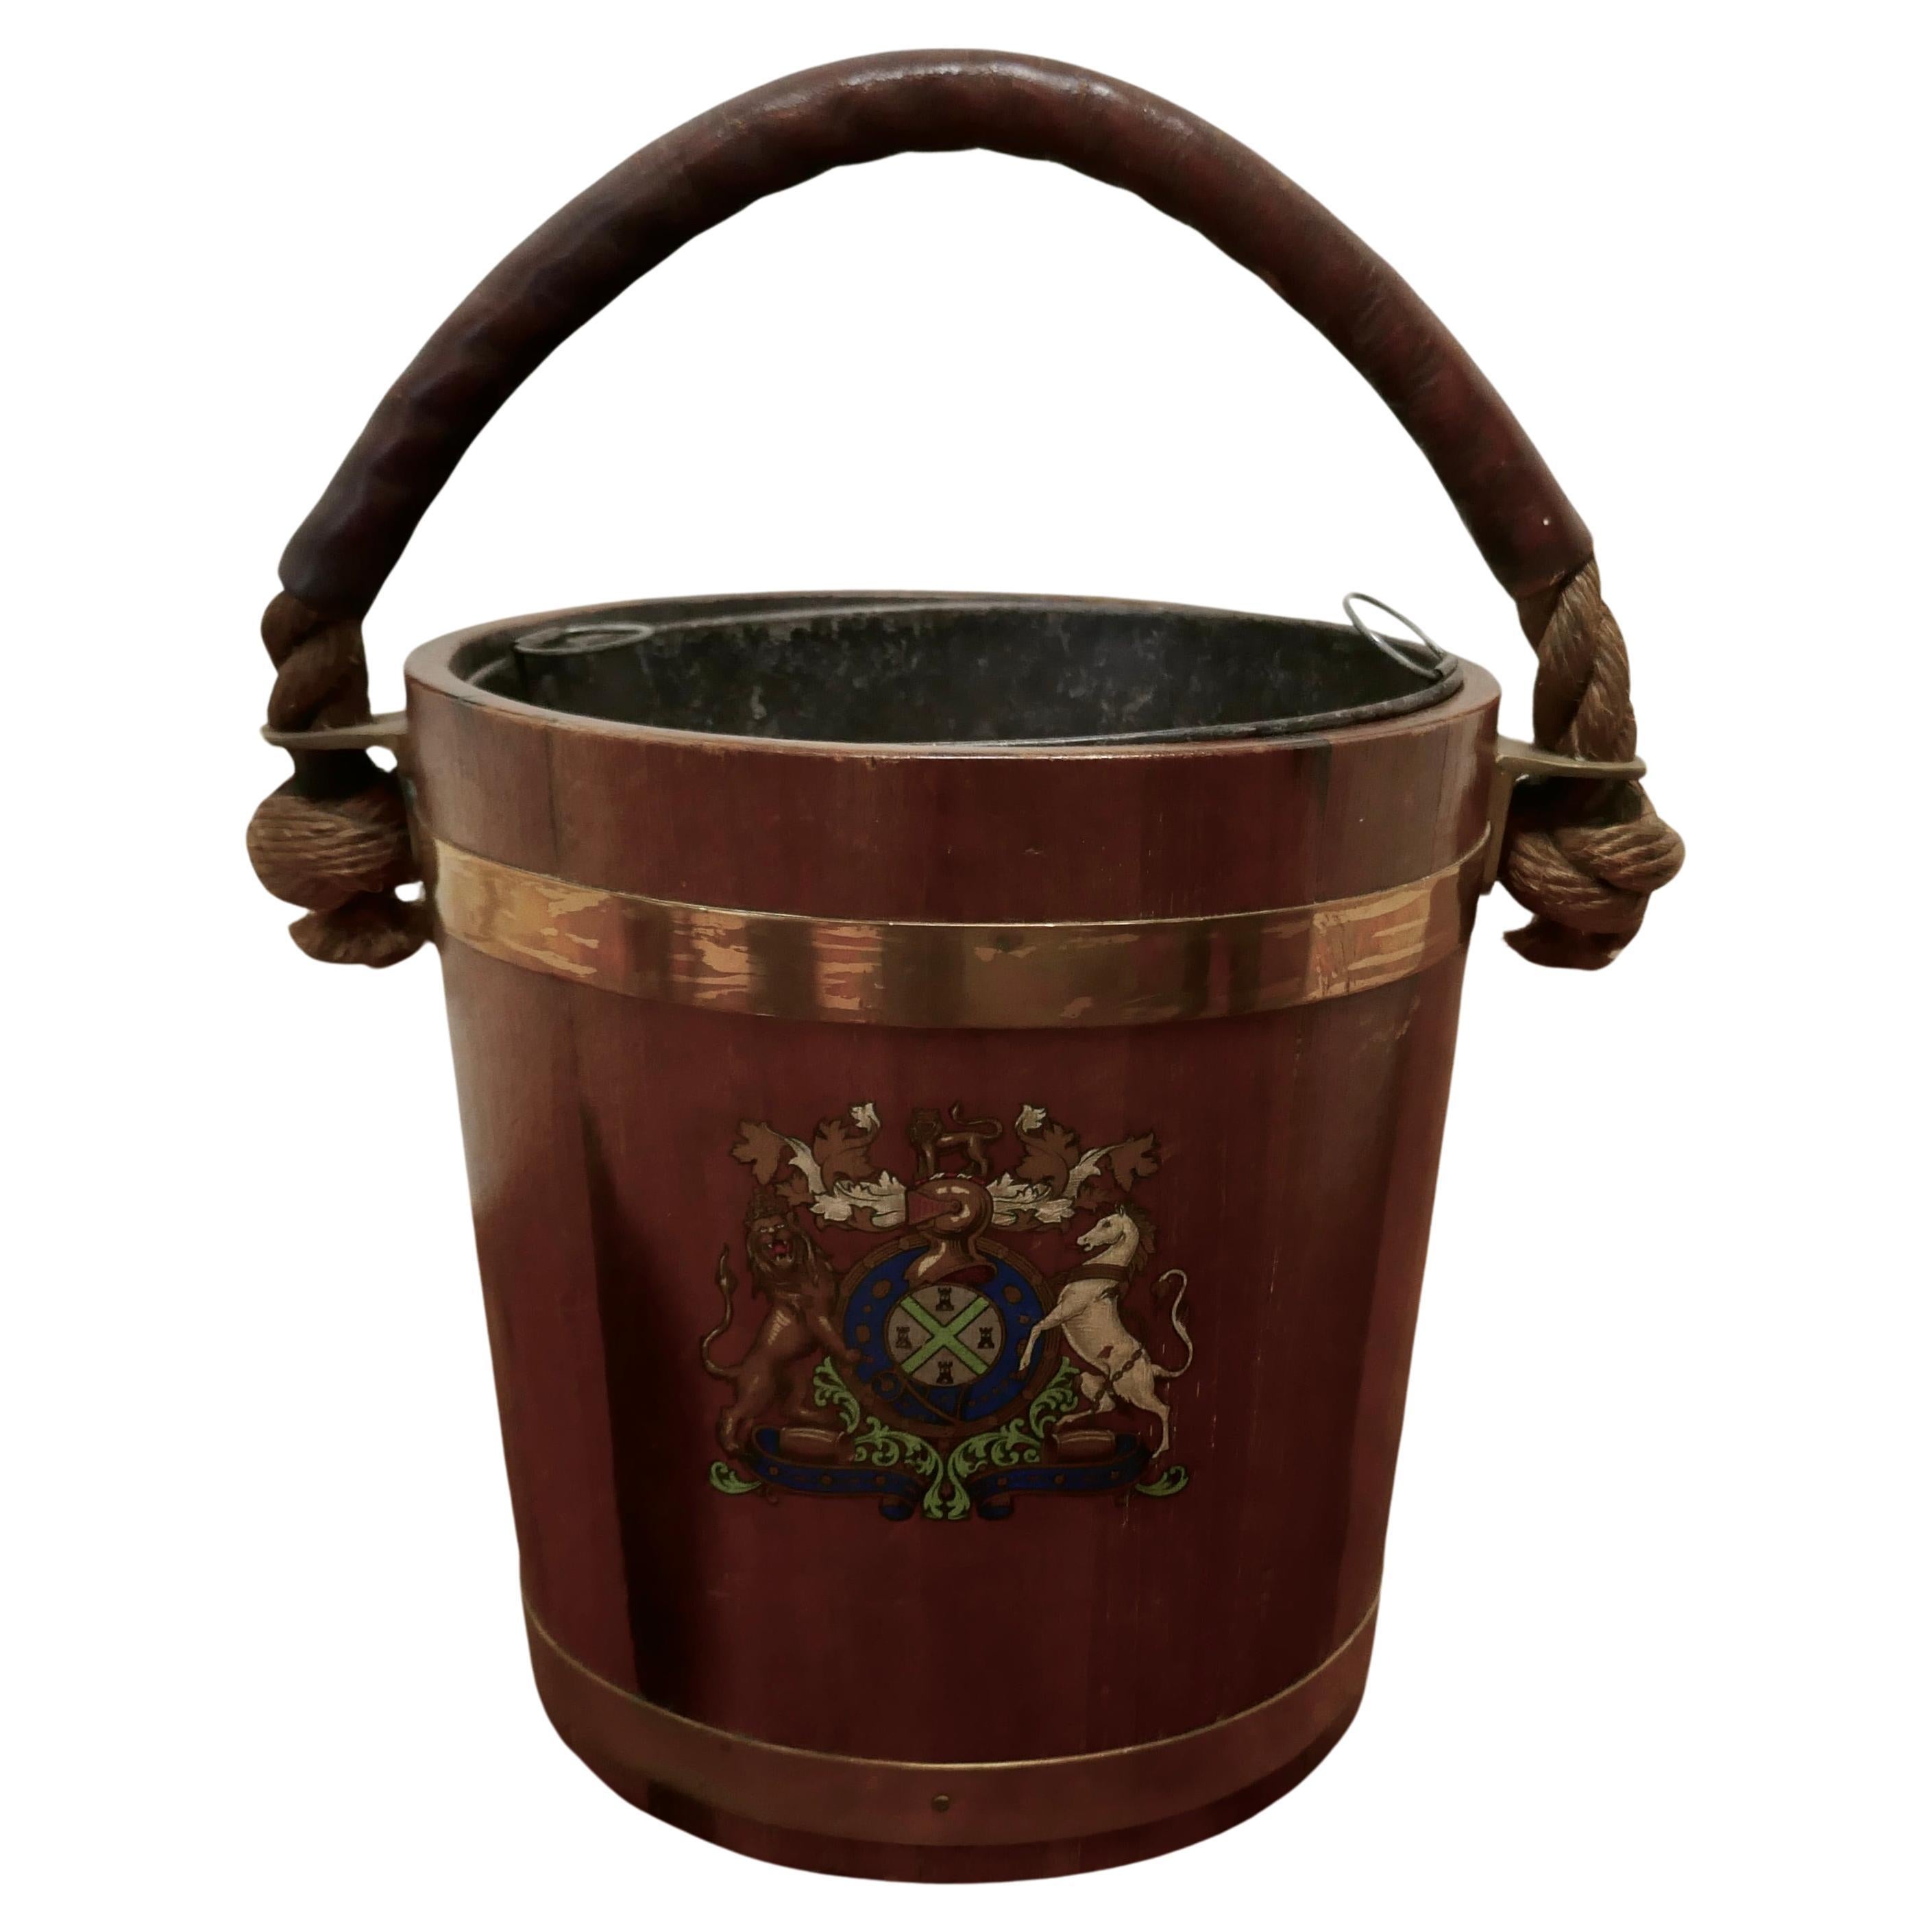 When were leather fire buckets used?